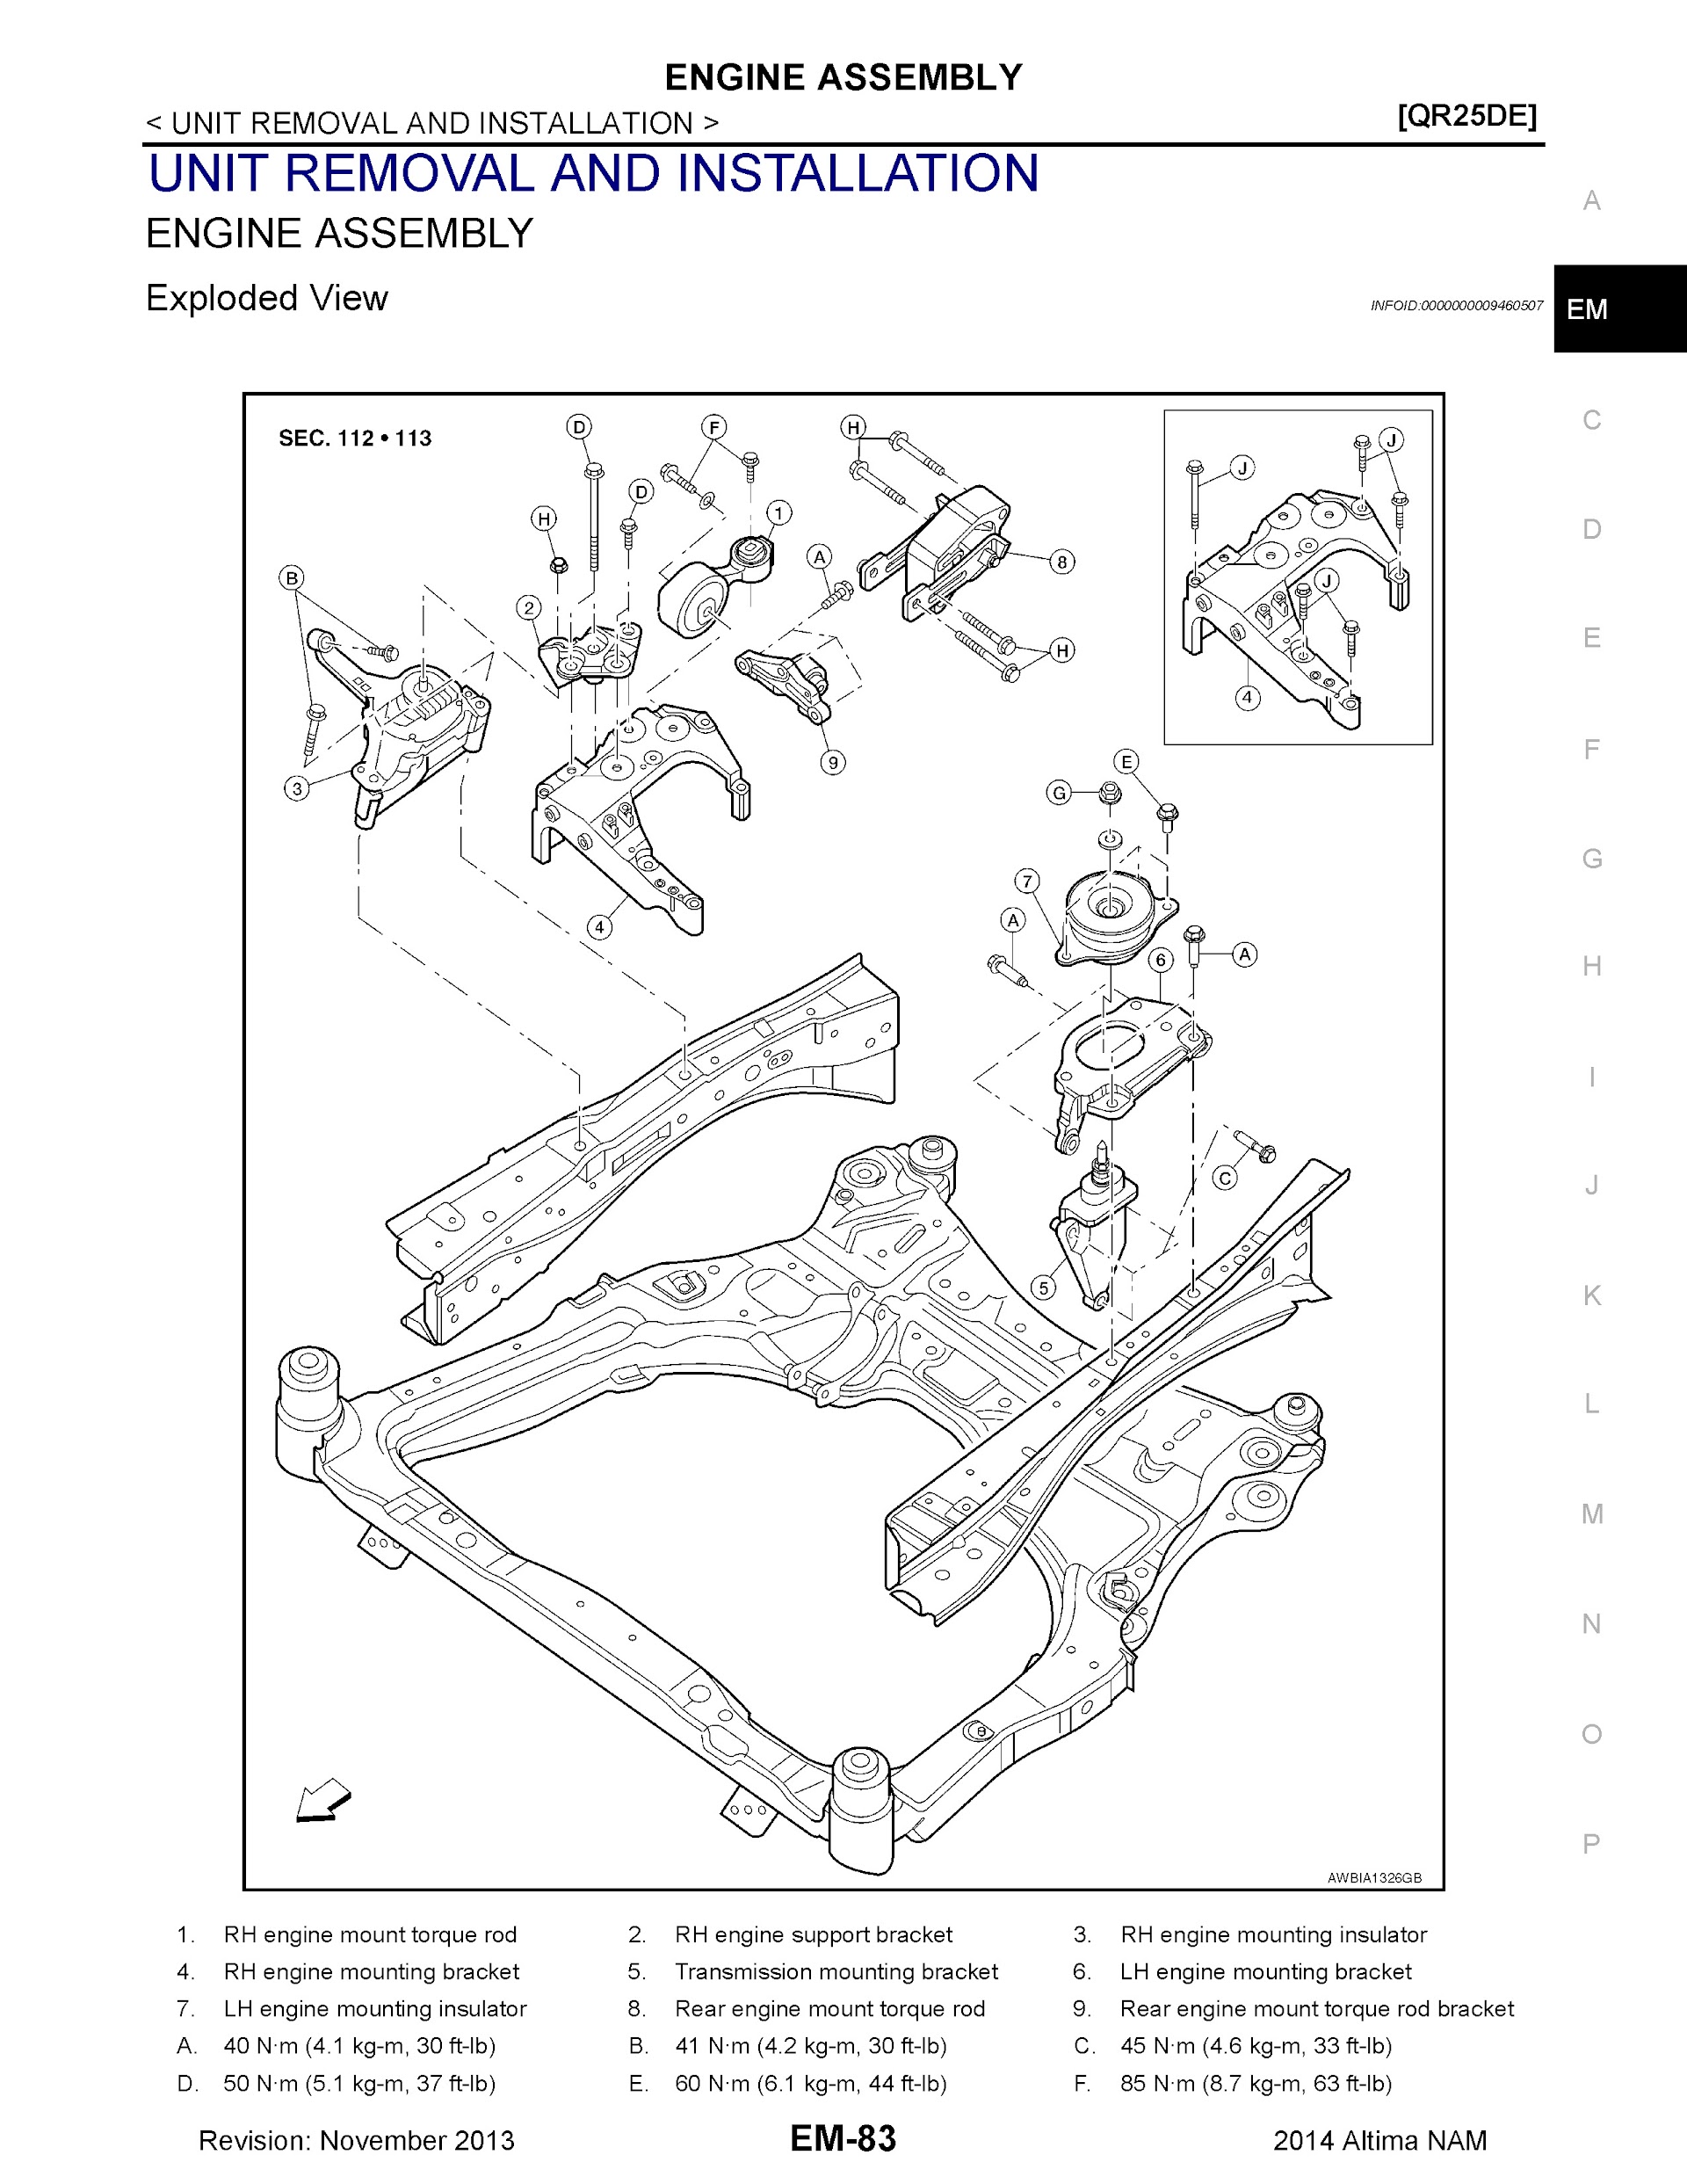 2014 Nissan Altima Repair Manual, Engine Assembly Unit Removal and Installation